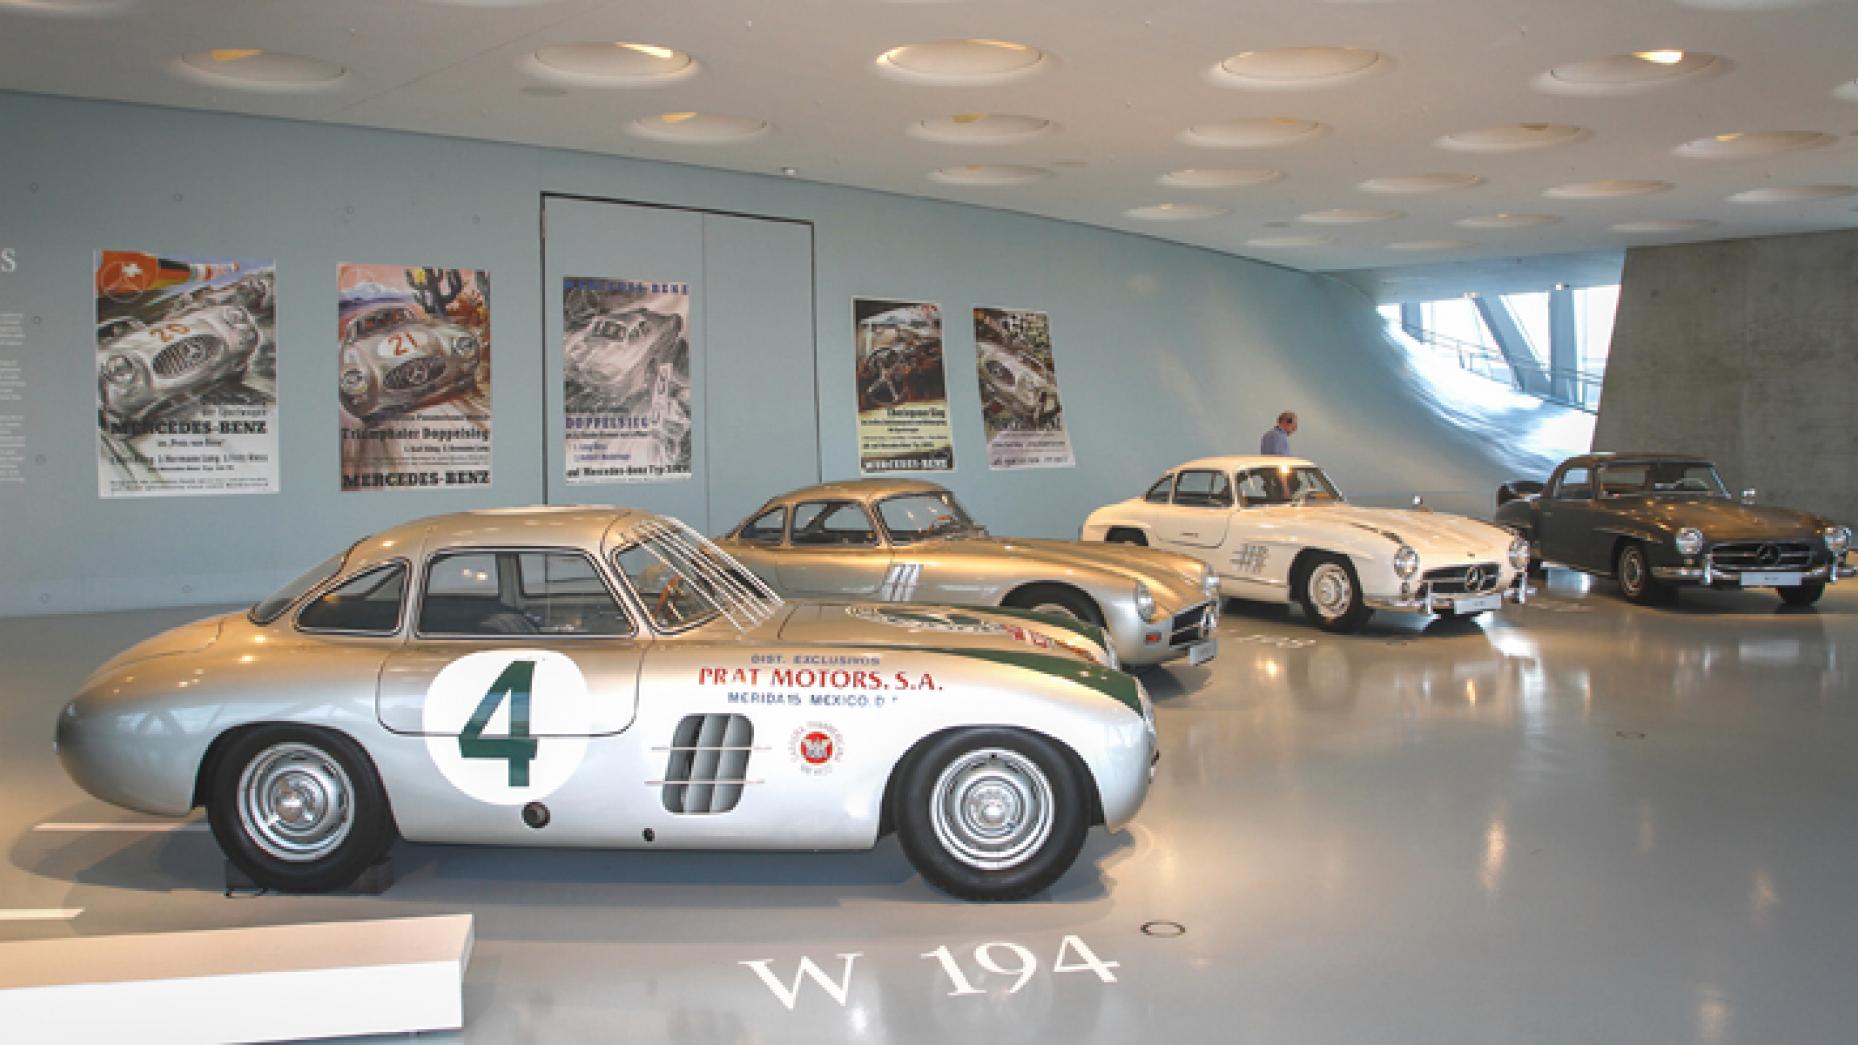 MERCEDES-BENZ SL: A room of full of Merc SLs is a good room. Racing gullwings mix with pedestrian gullwings. Check out those early racing posters on the wall, too for a hit of nostalgia.